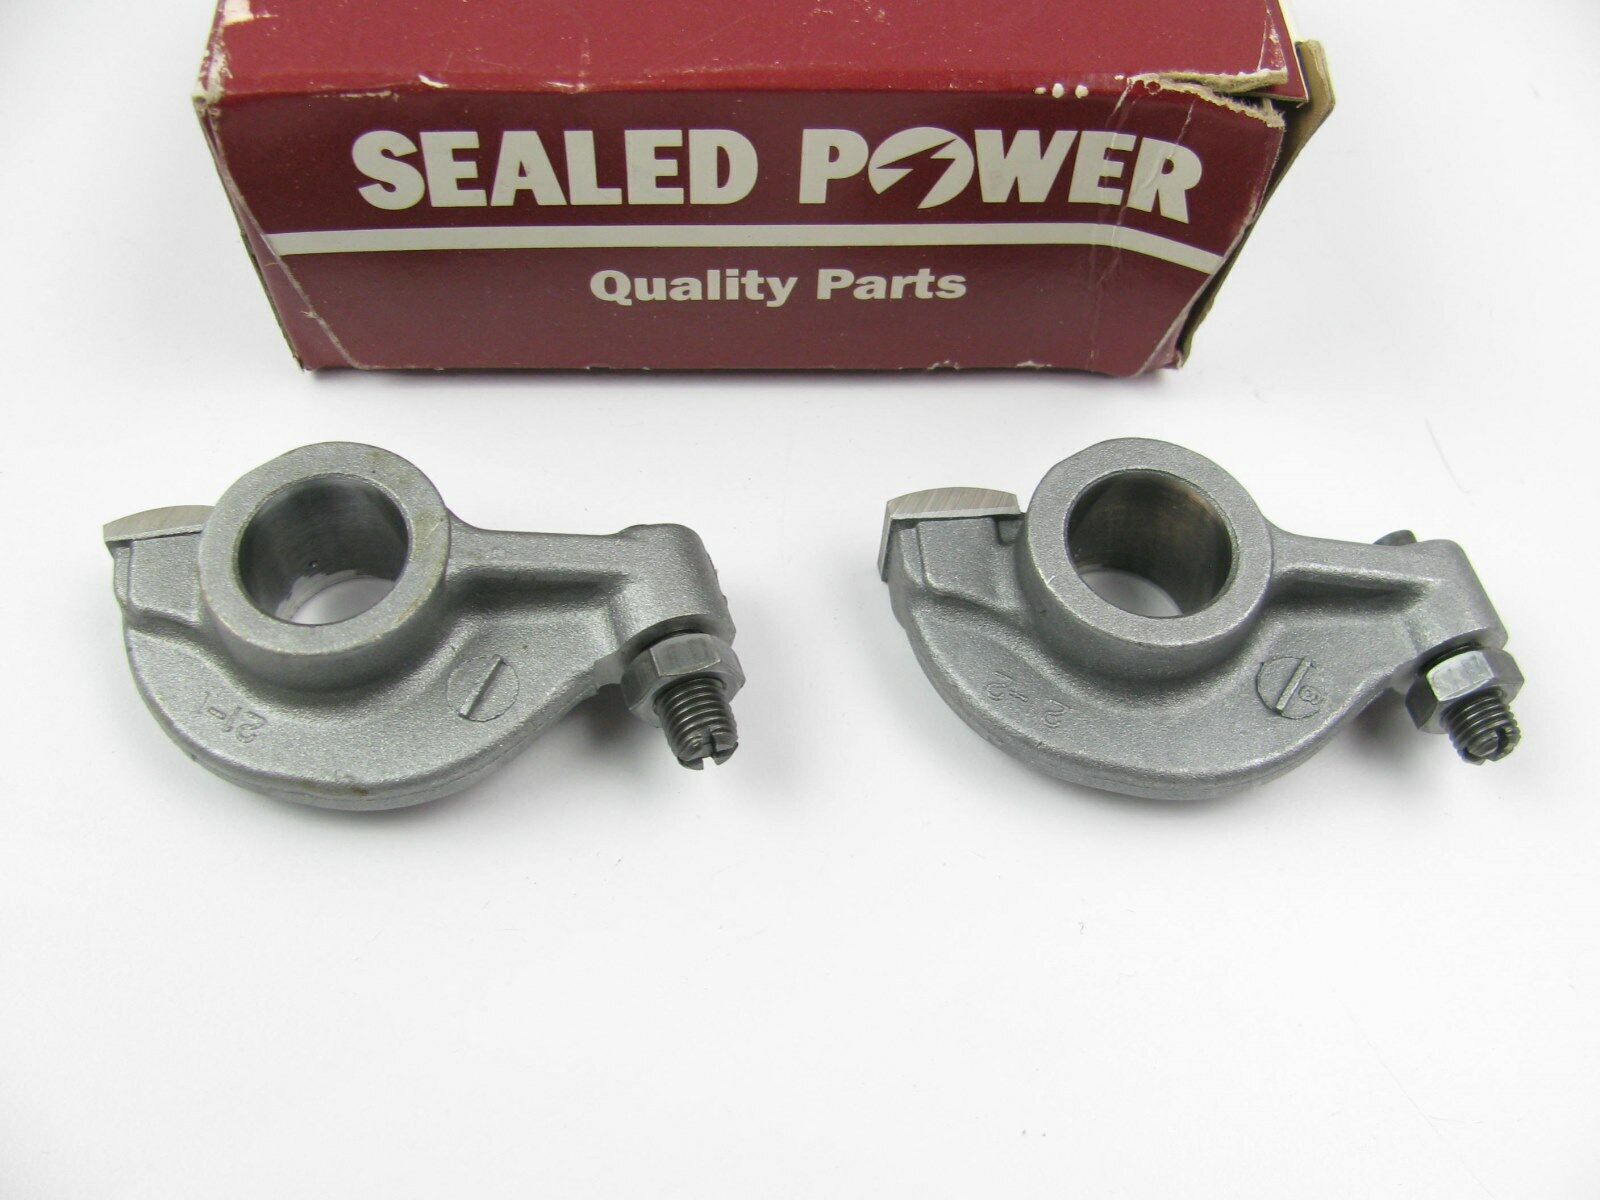 (2) Sealed Power R-919 Rocker Arms - Exhaust For 1980-1988 Chrysler 1.6L